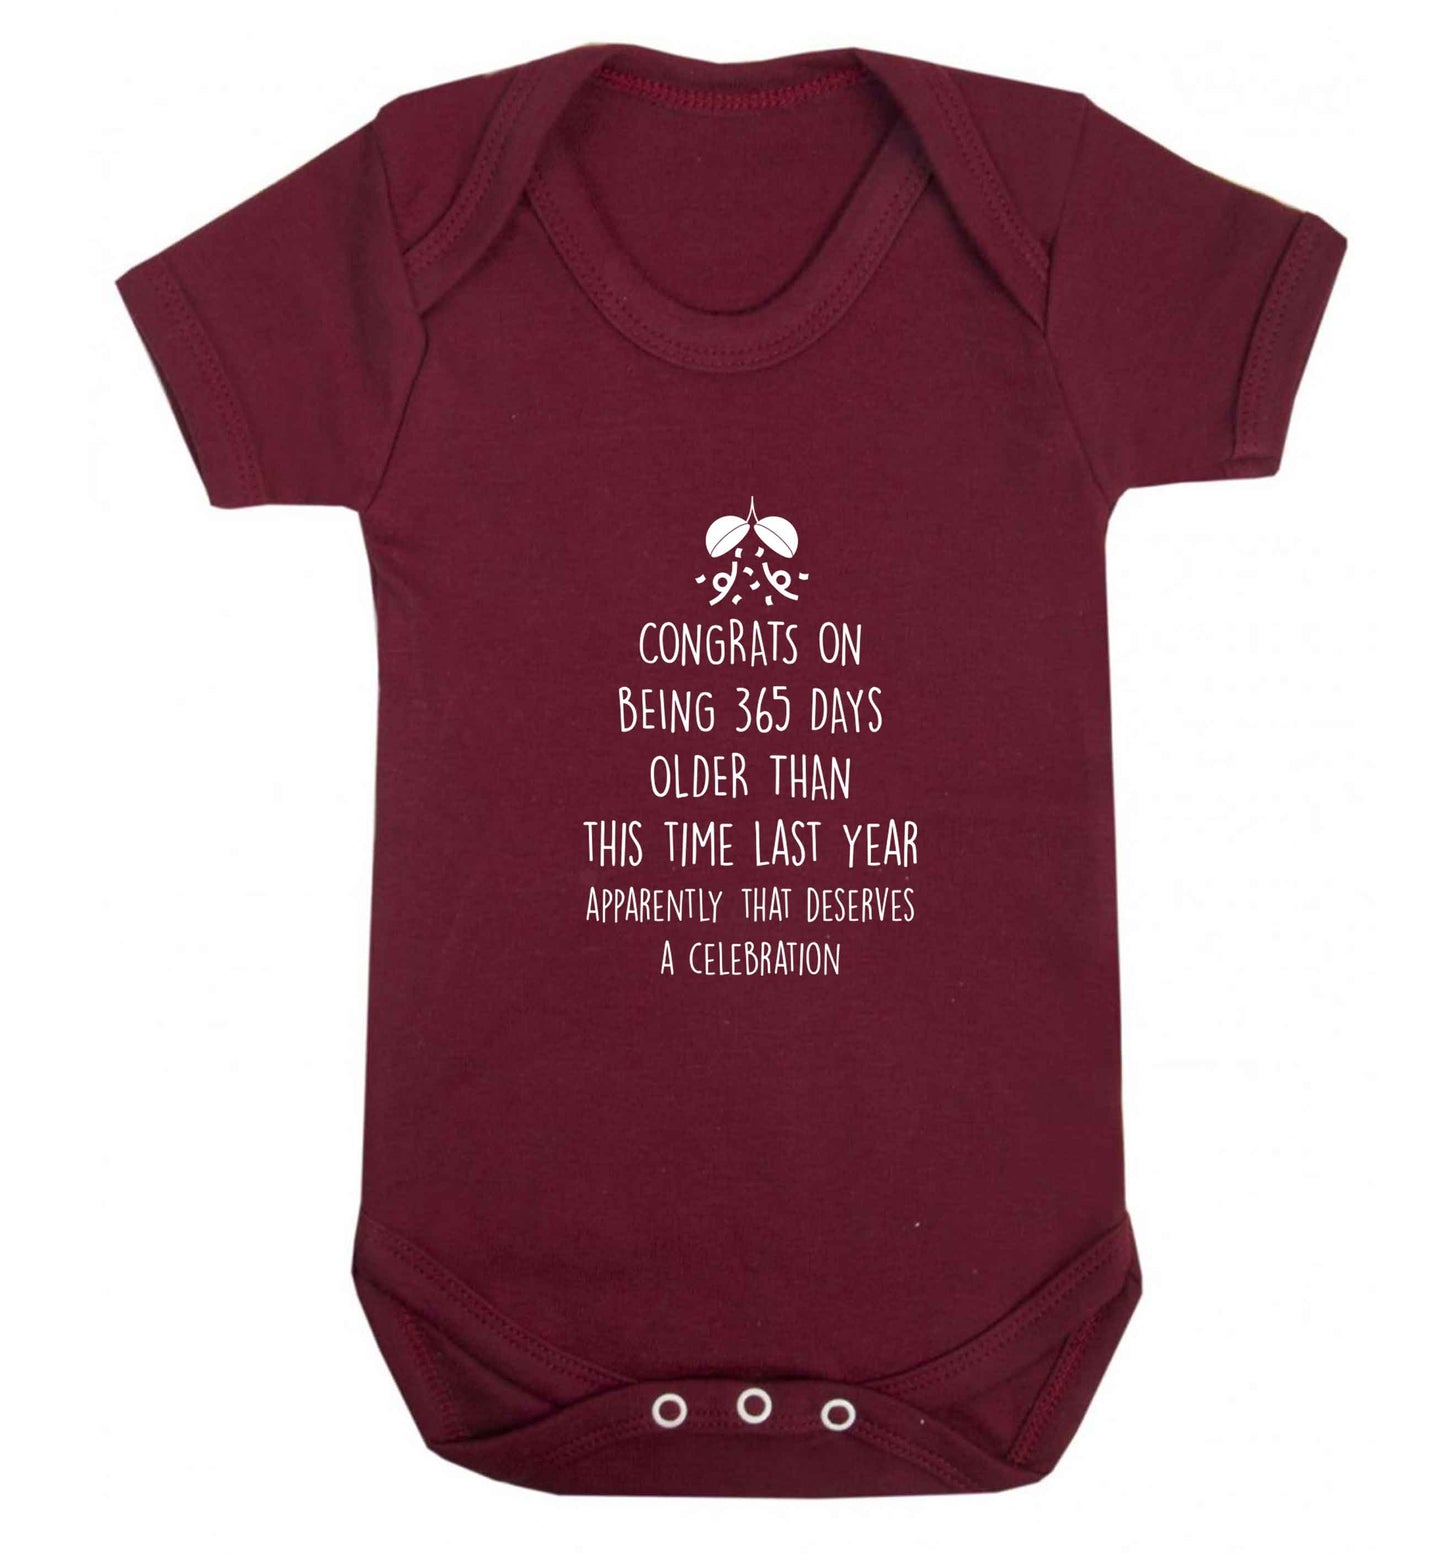 Congrats on being 365 days older than you were this time last year apparently that deserves a celebration baby vest maroon 18-24 months